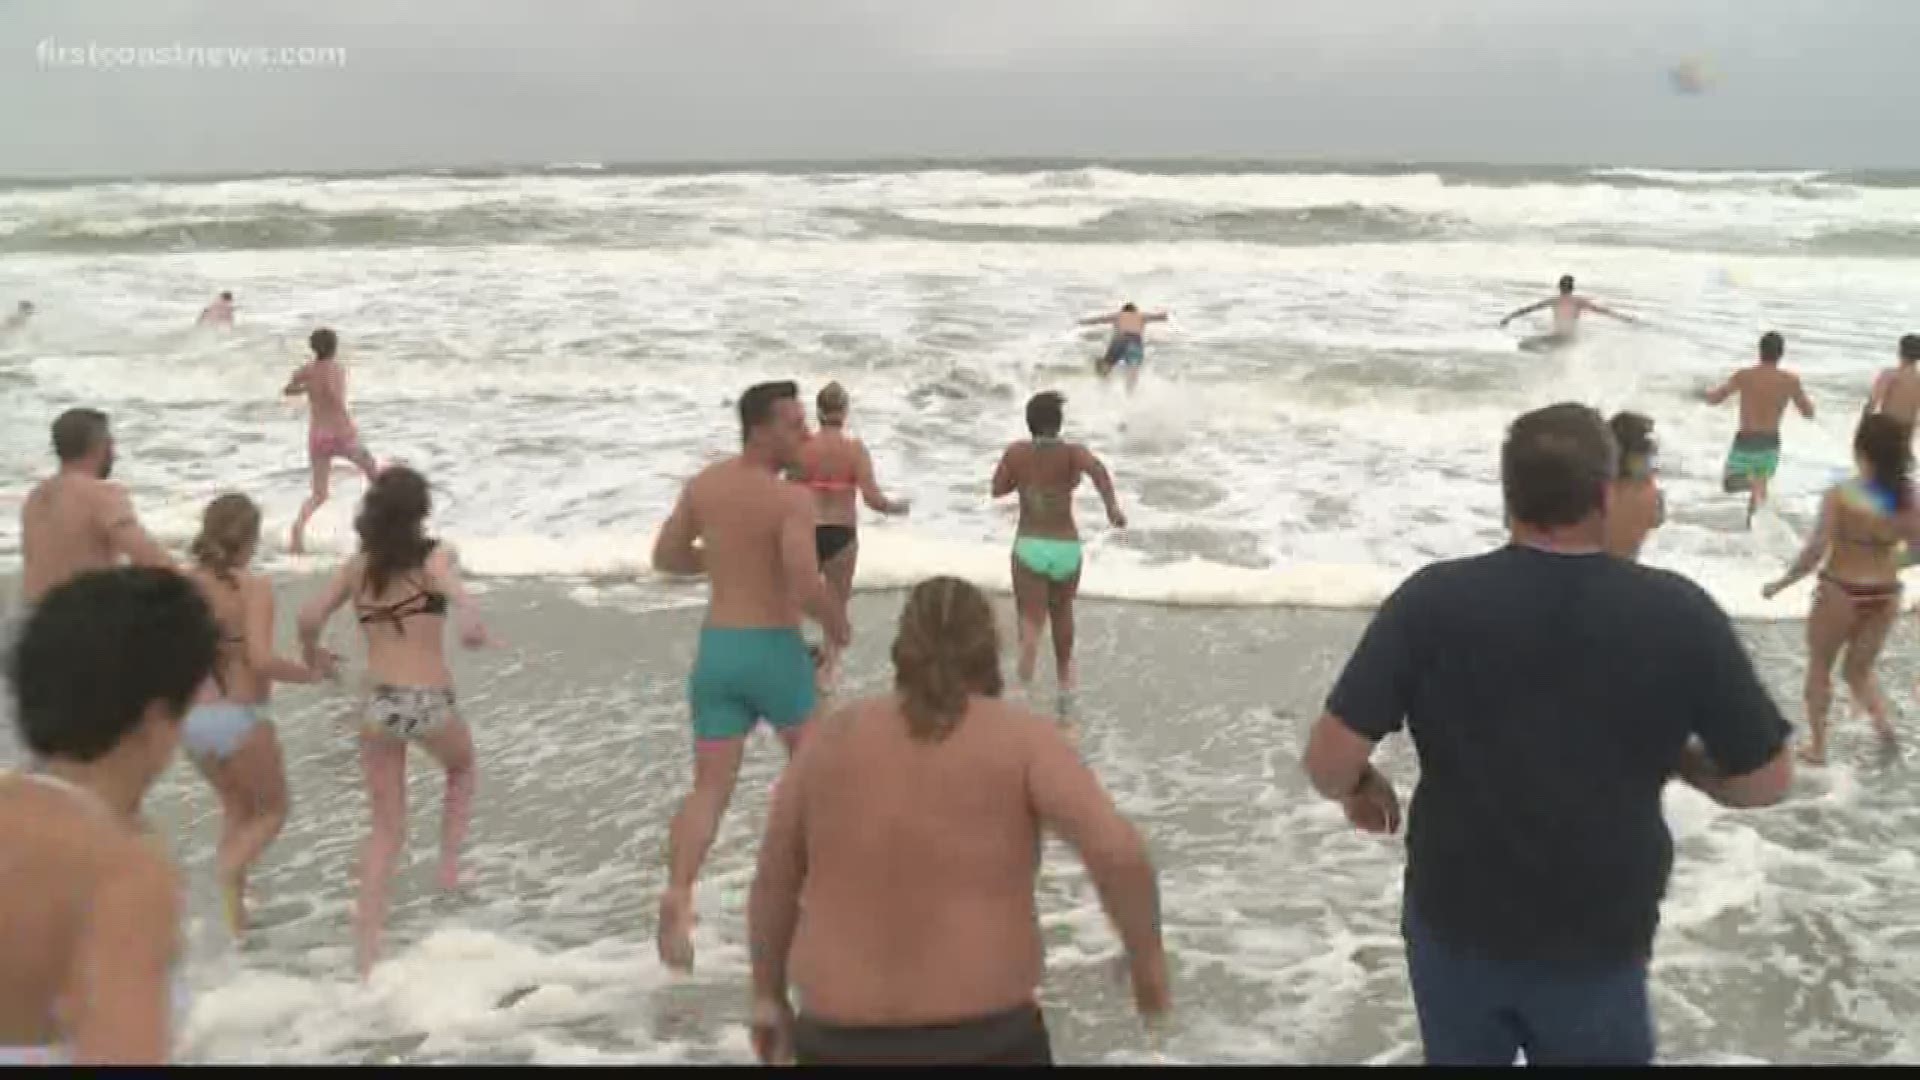 The annual Polar Plunge at Jacksonville Beach went off without a hitch, even with really cold temperatures.